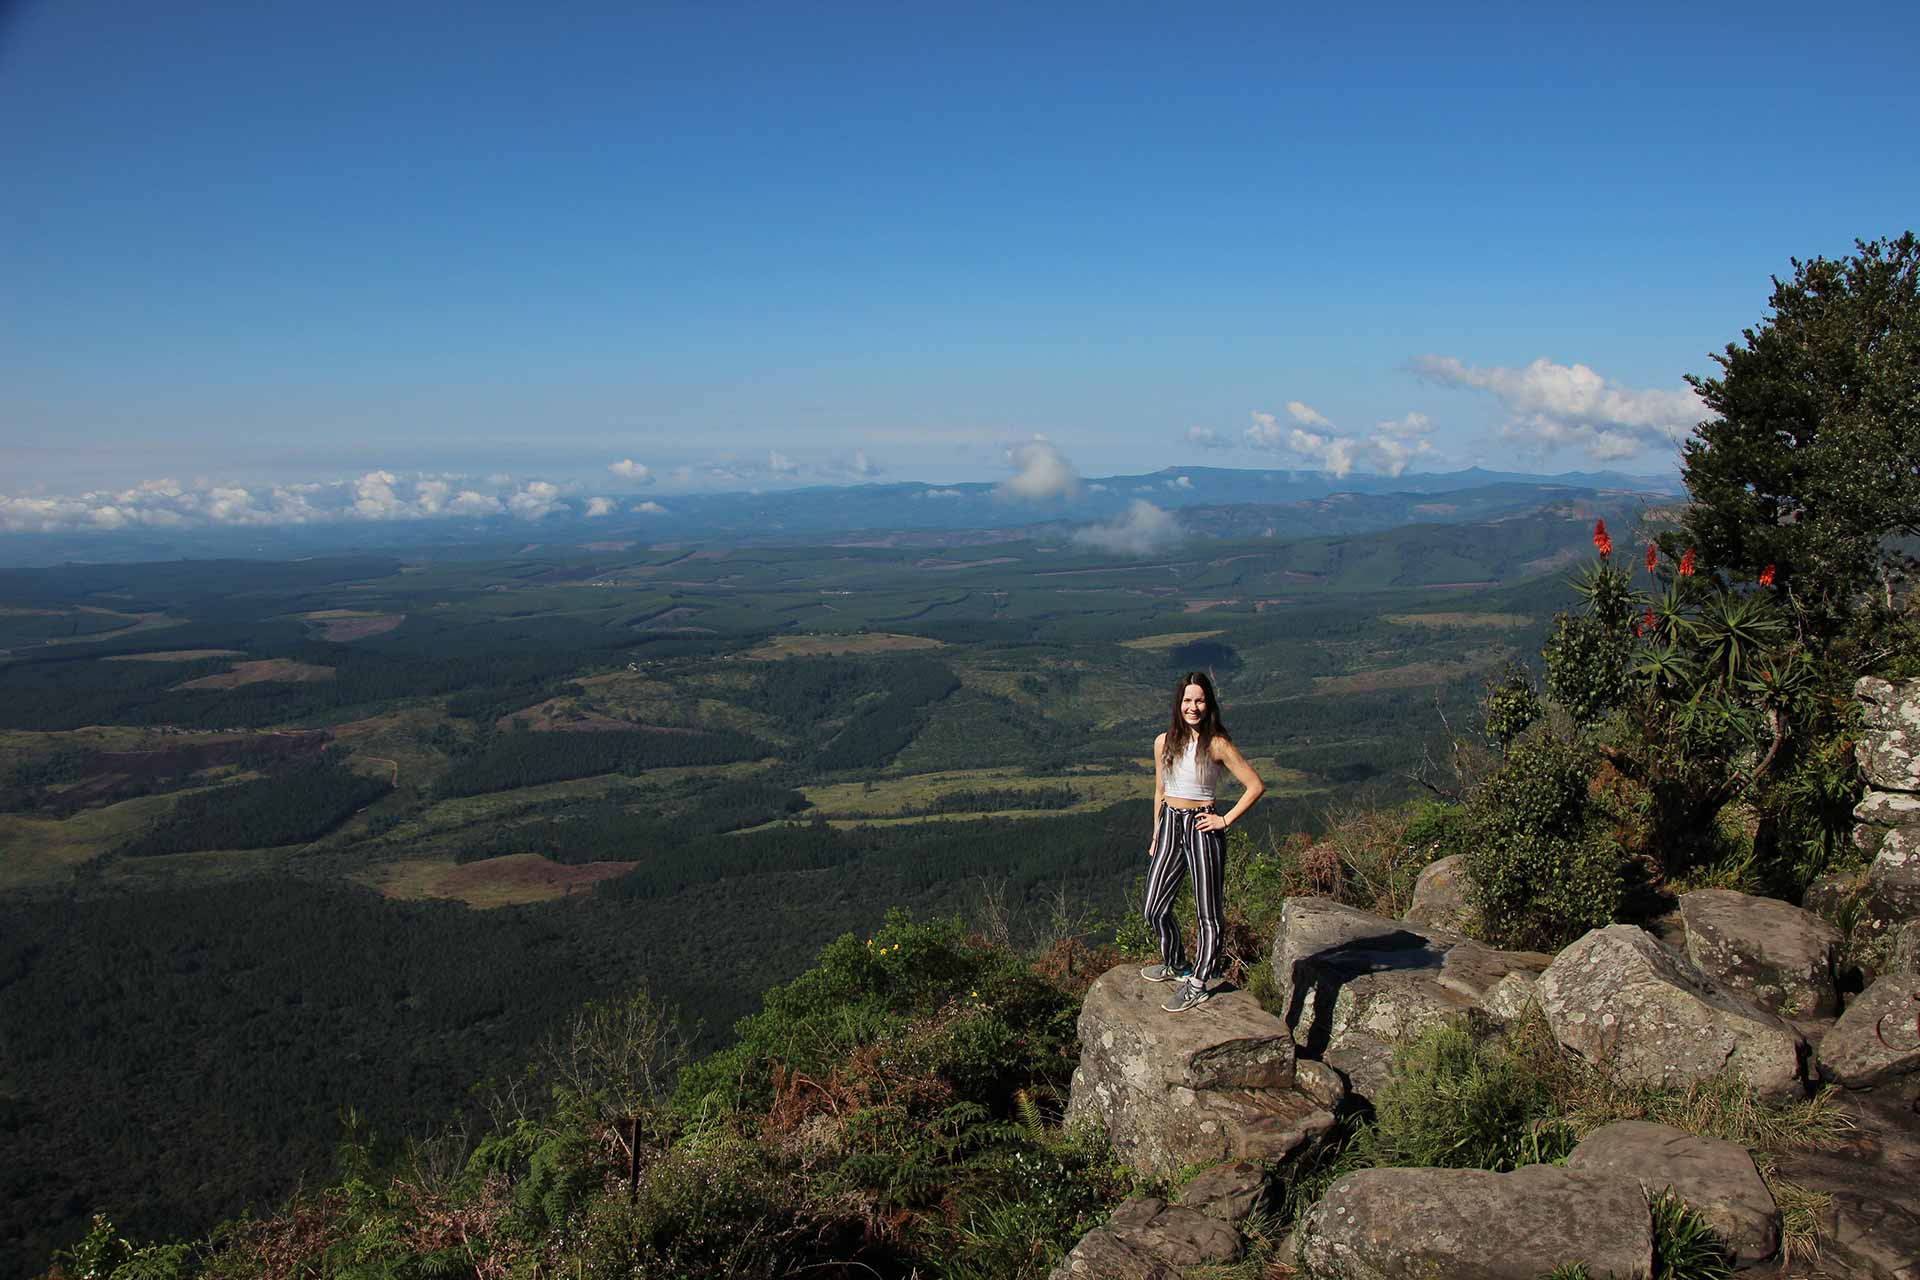 Enjoying the scenery at God’s Window viewpoint in Mpumalanga, South Africa.